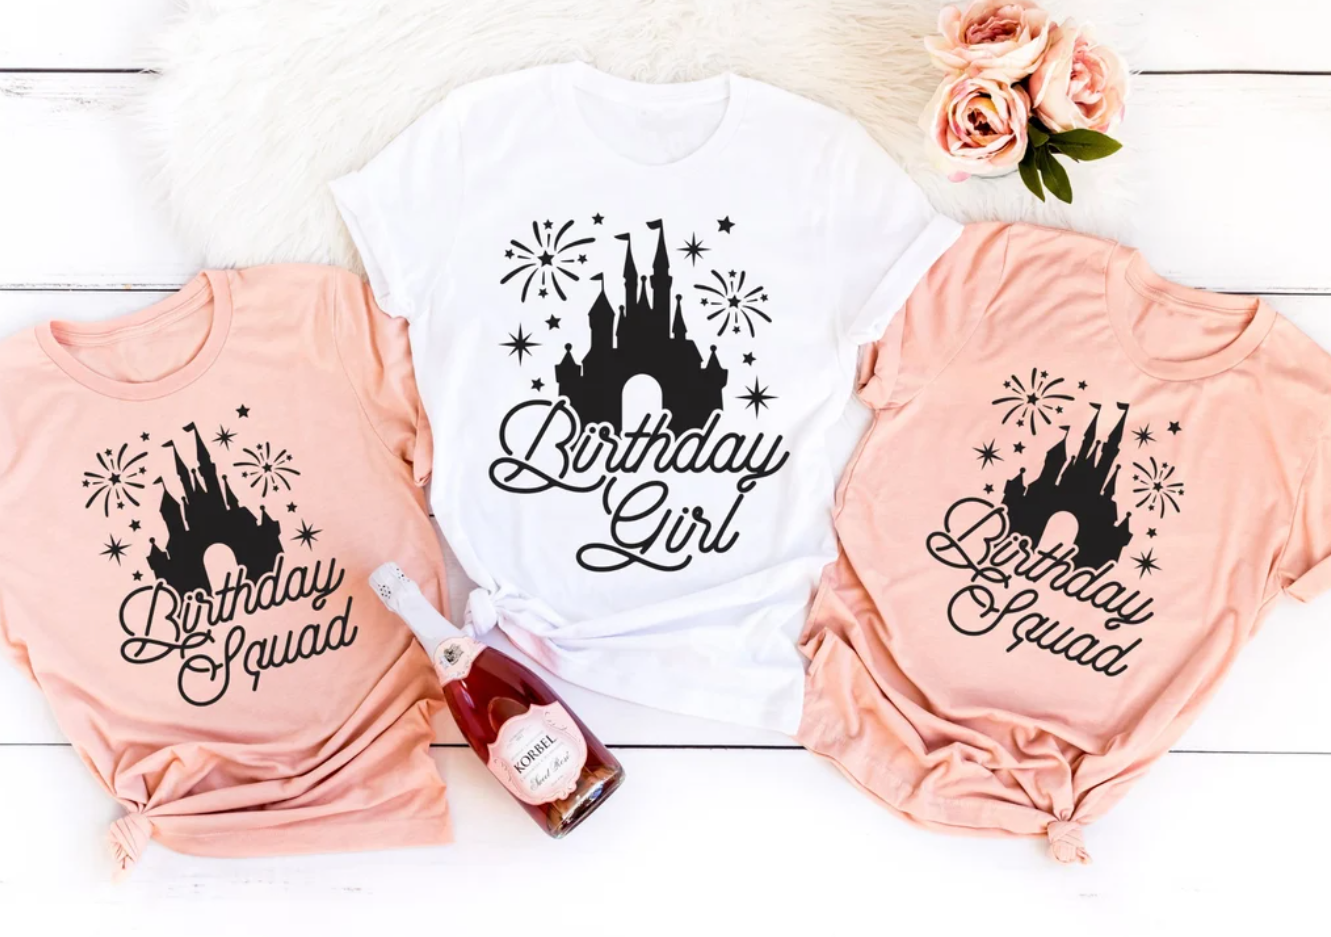 Birthday Girl/ Birthday Squad Castle Tees | Birthday Tee | Vacation Tee | Various Colors of Print | Each Shirt Sold Separately